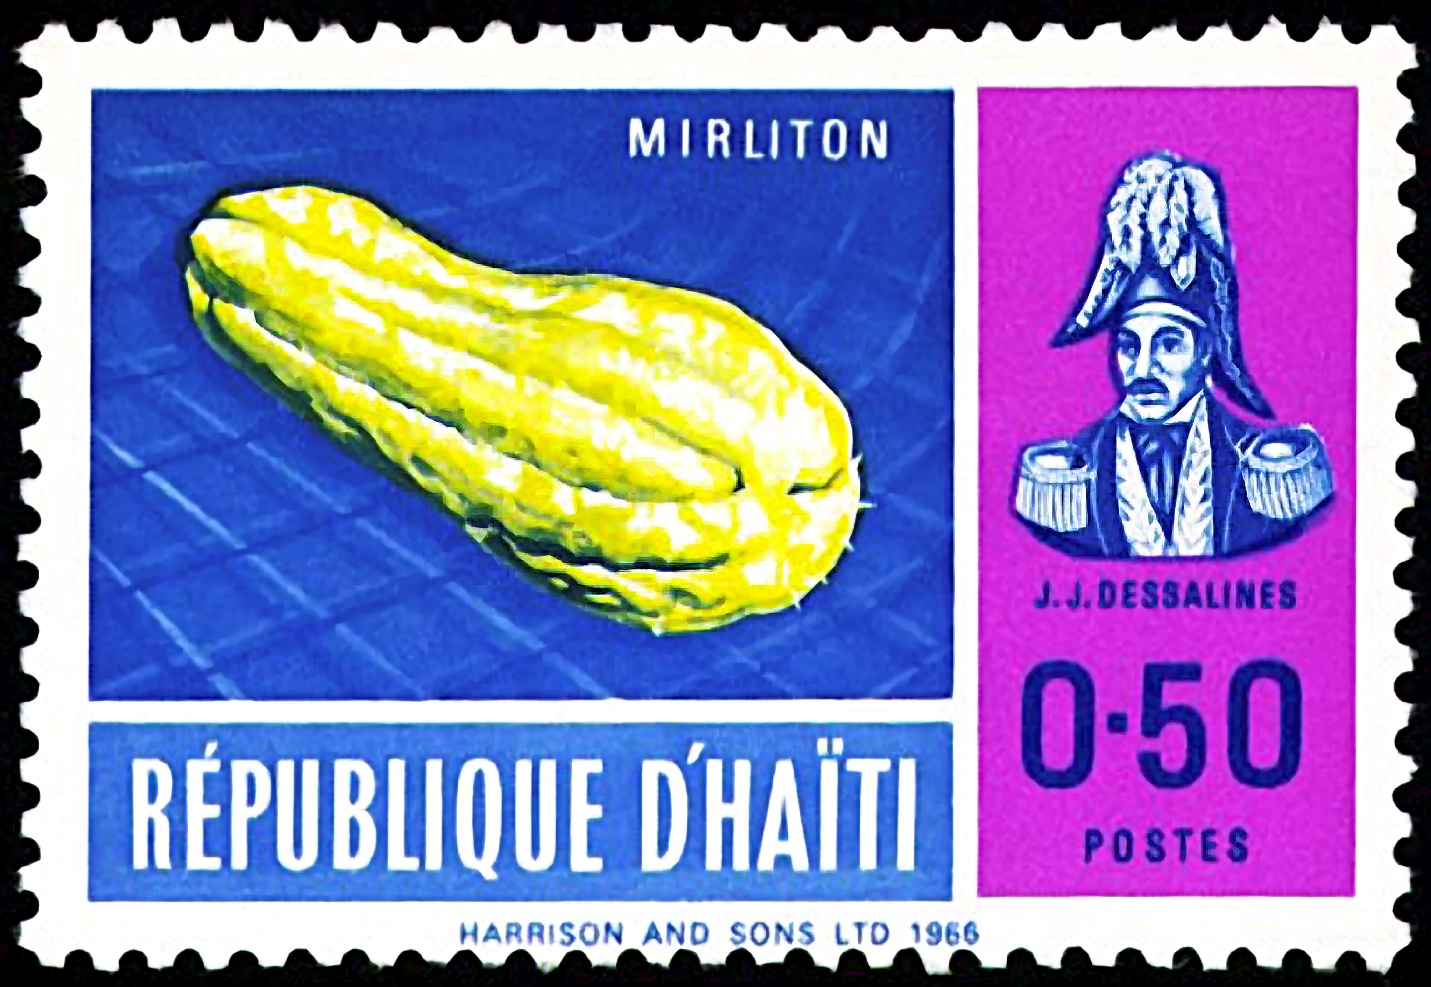 C:\Users\lance\Documents\Pictures\mirliton stamp Revised by tim.jpg